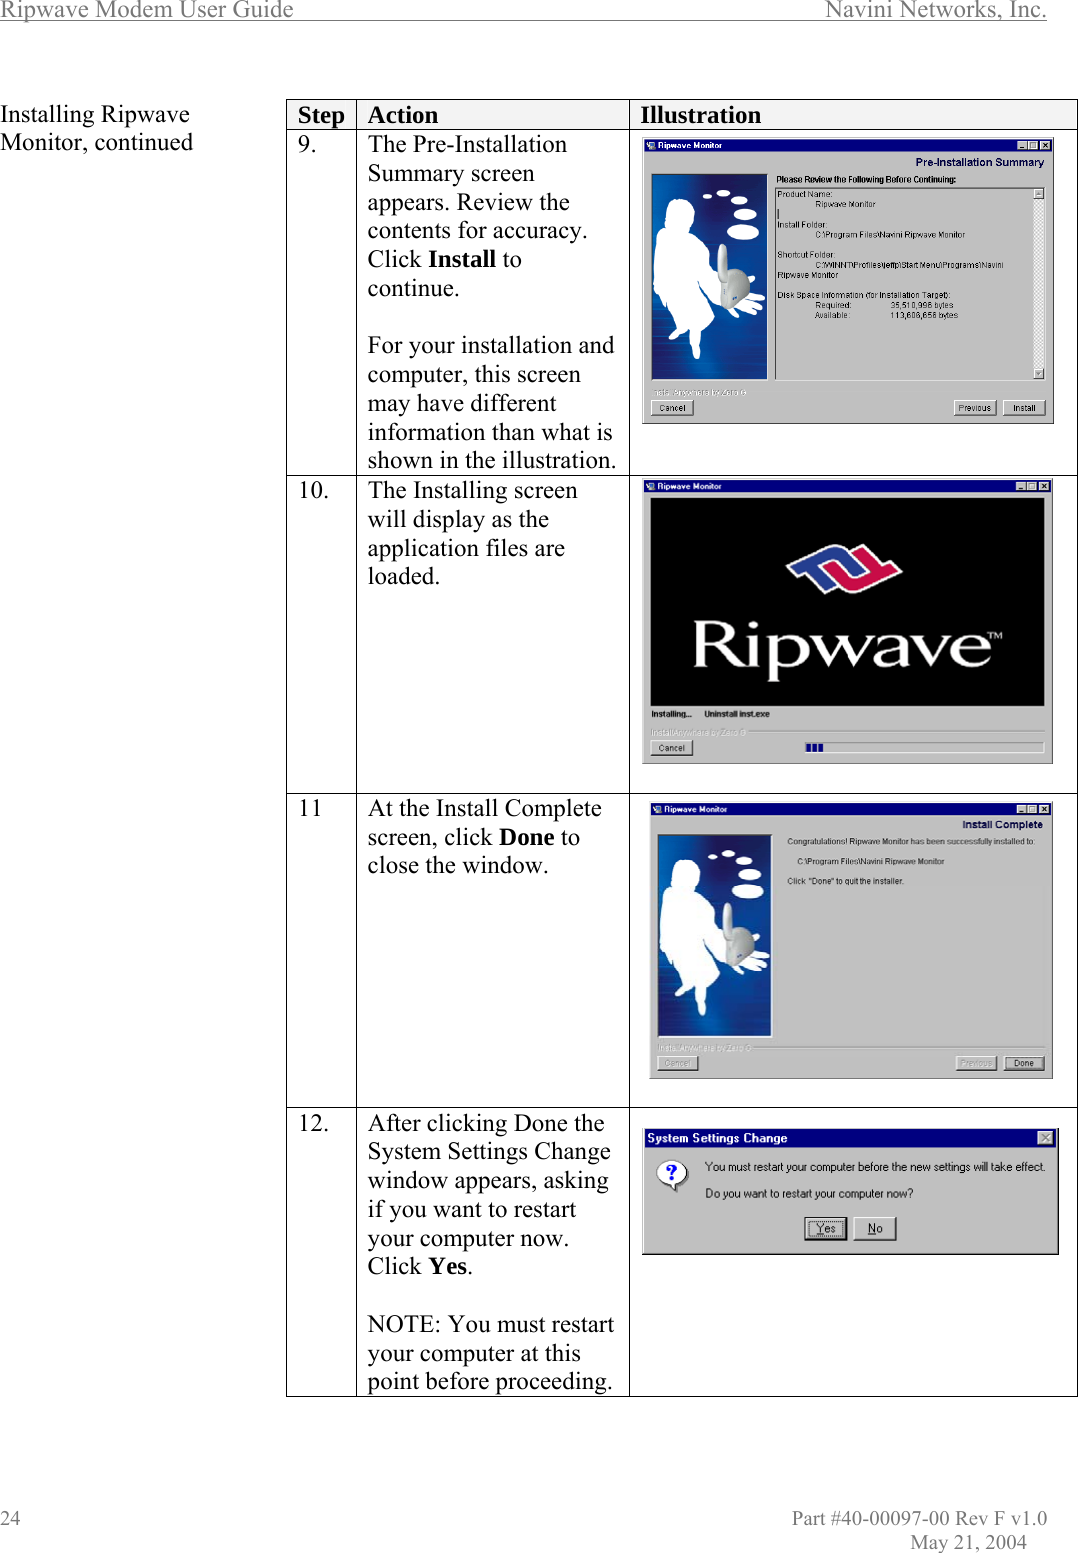 Ripwave Modem User Guide        Navini Networks, Inc. Installing Ripwave Monitor, continued                                             Step  Action  Illustration 9. The Pre-Installation Summary screen appears. Review the contents for accuracy. Click Install to continue.   For your installation and computer, this screen may have different information than what is shown in the illustration.  10.  The Installing screen will display as the application files are loaded.  11  At the Install Complete screen, click Done to close the window.  12.  After clicking Done the System Settings Change window appears, asking if you want to restart your computer now. Click Yes.  NOTE: You must restart your computer at this point before proceeding.   24                                  Part #40-00097-00 Rev F v1.0               May 21, 2004 